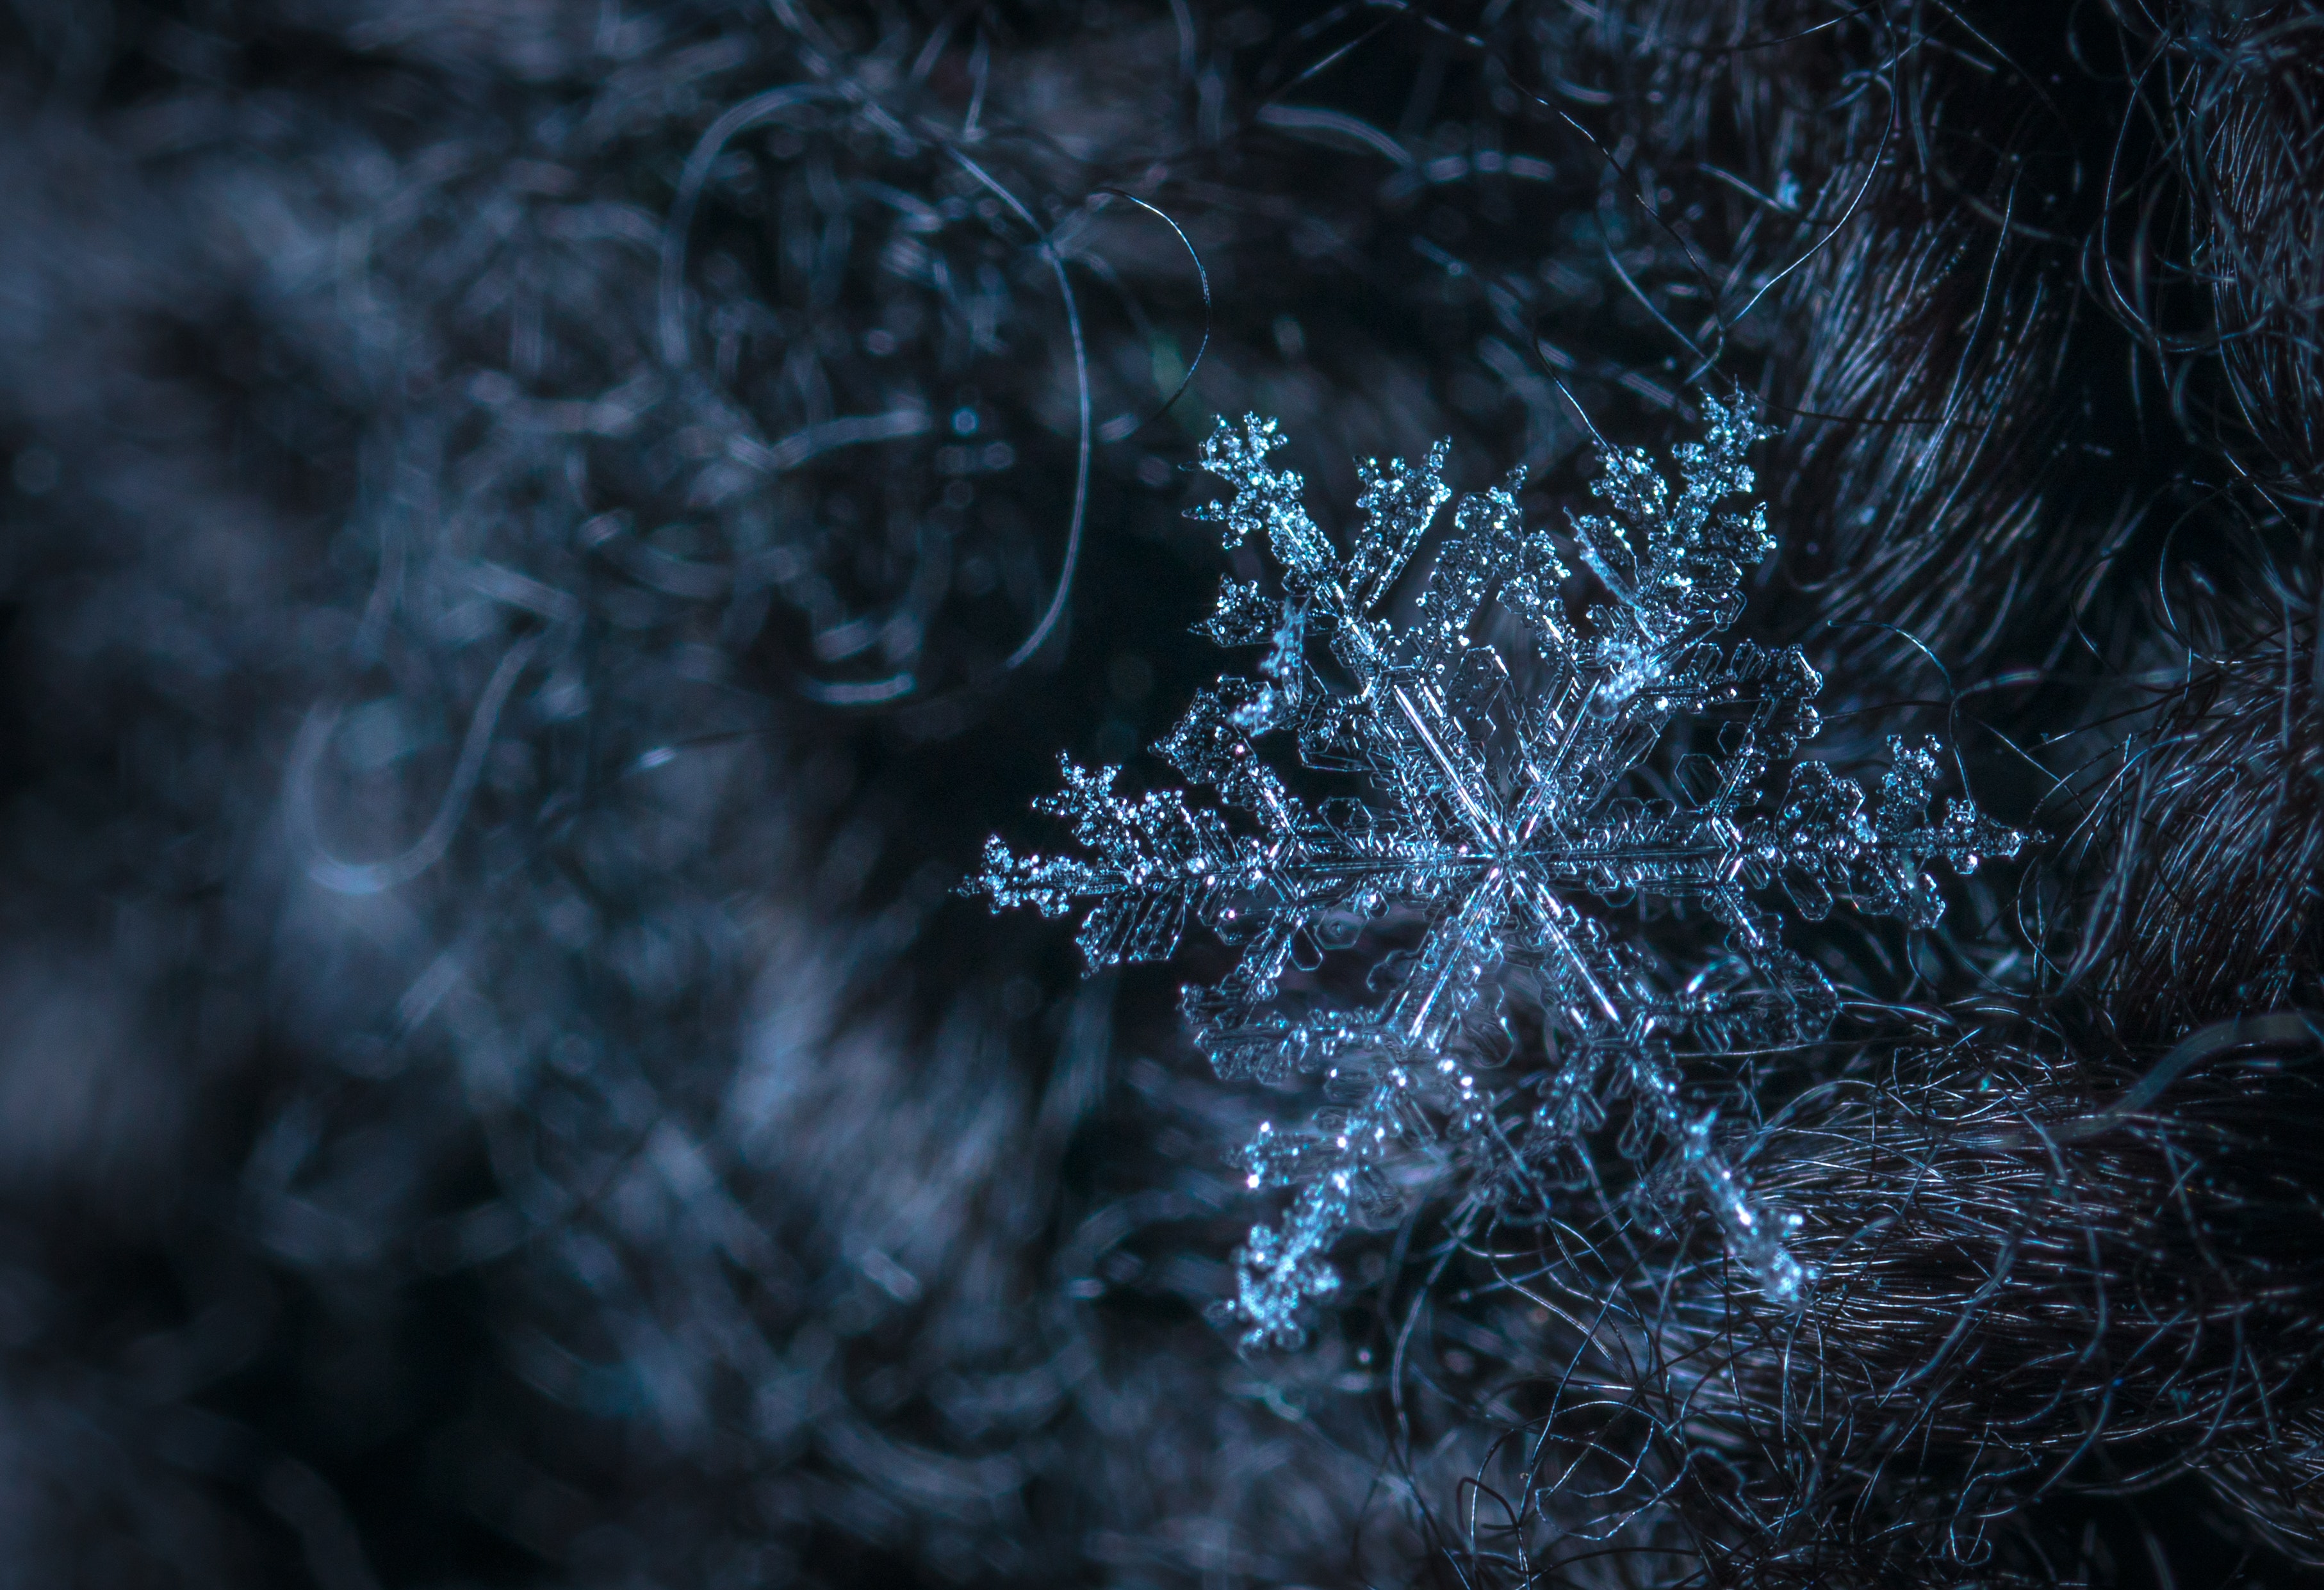 Snowflake photos download the best free snowflake stock photos hd images